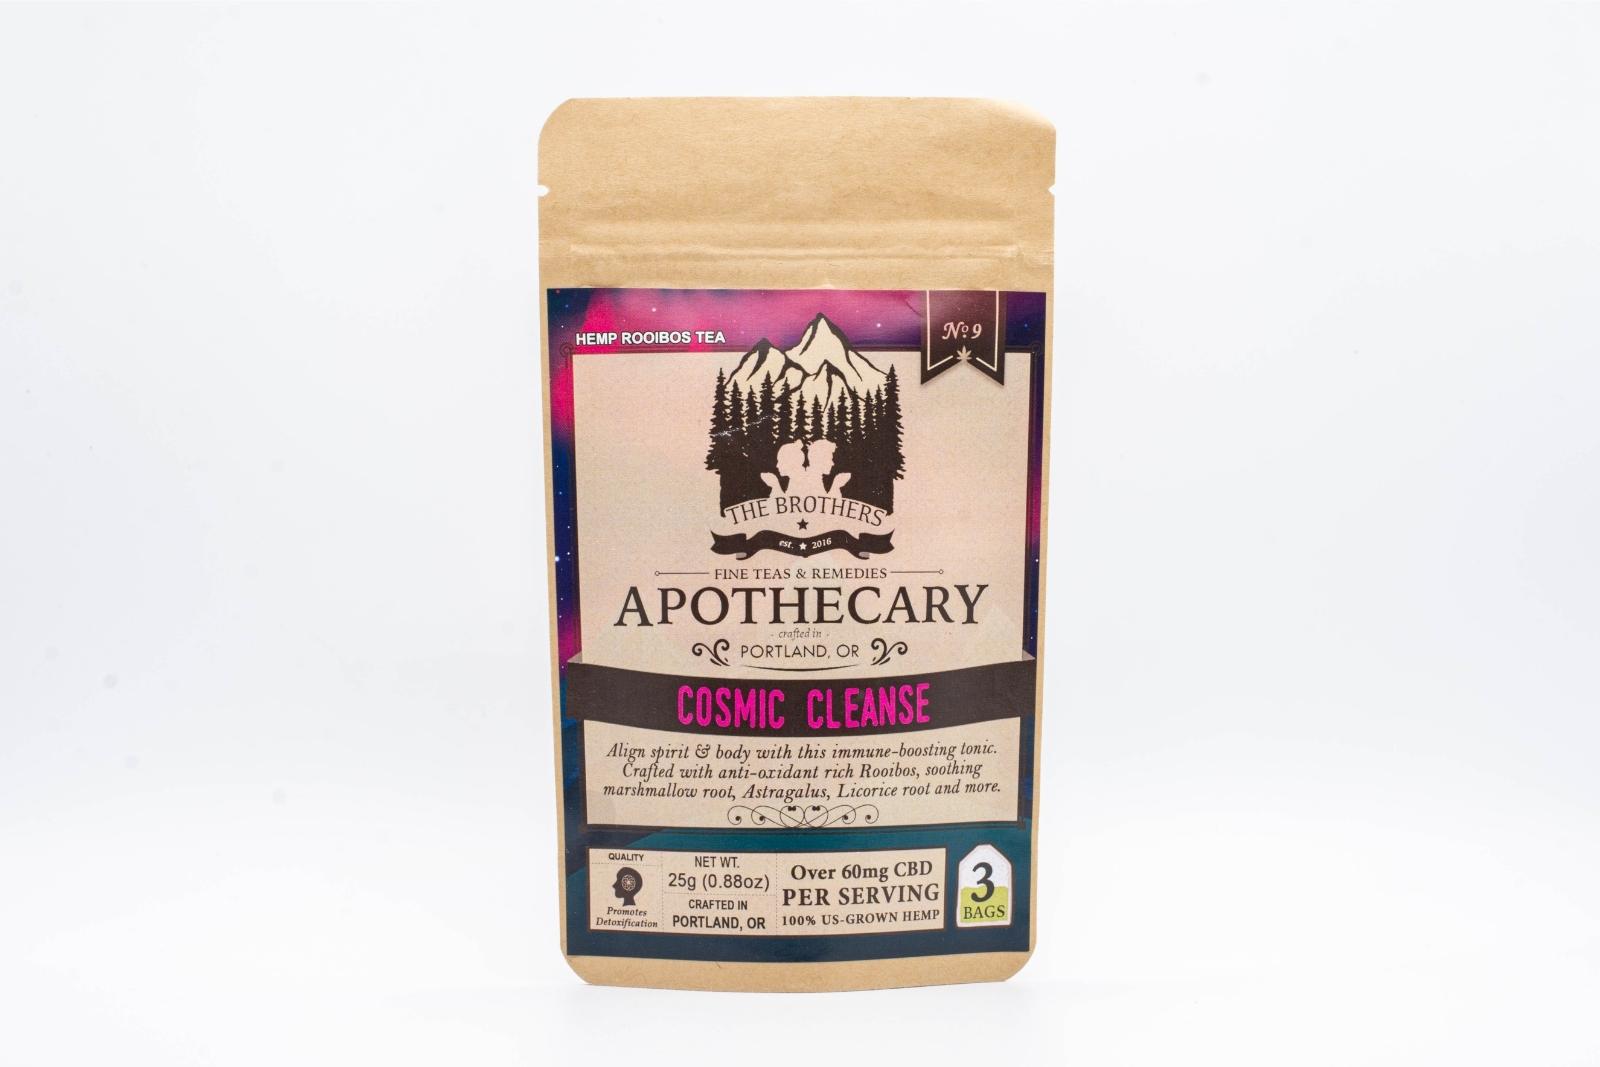 A large packet of The Brothers Apothecary's Cosmic Cleanse Tea on a white background